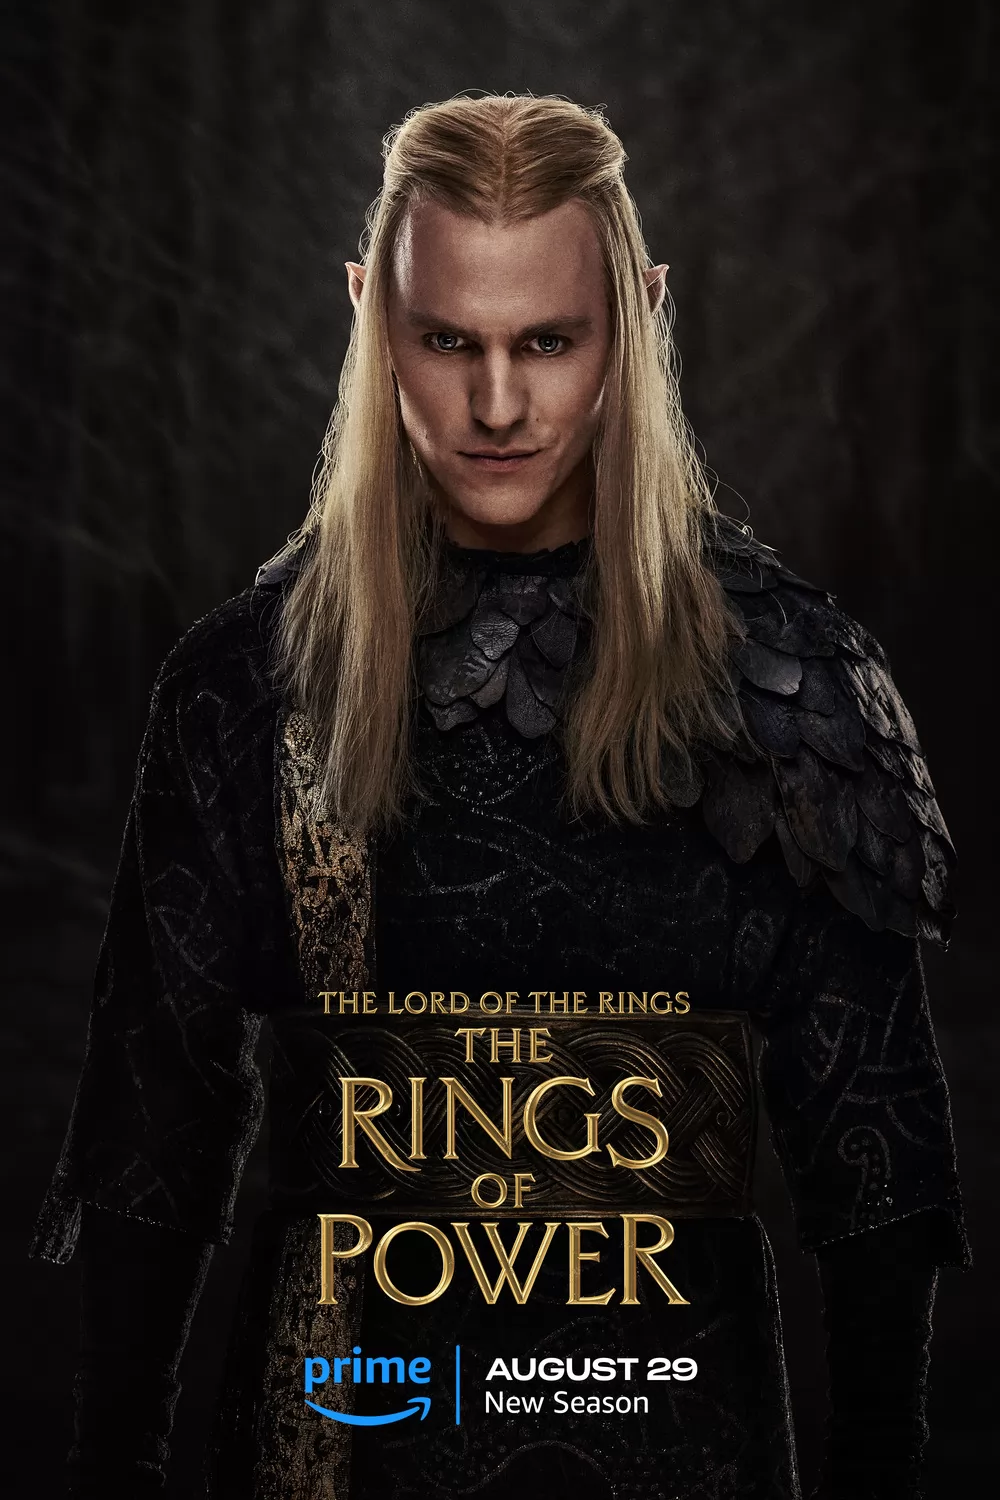 Властелин колец: Кольца Власти / The Lord of the Rings: The Rings of Power